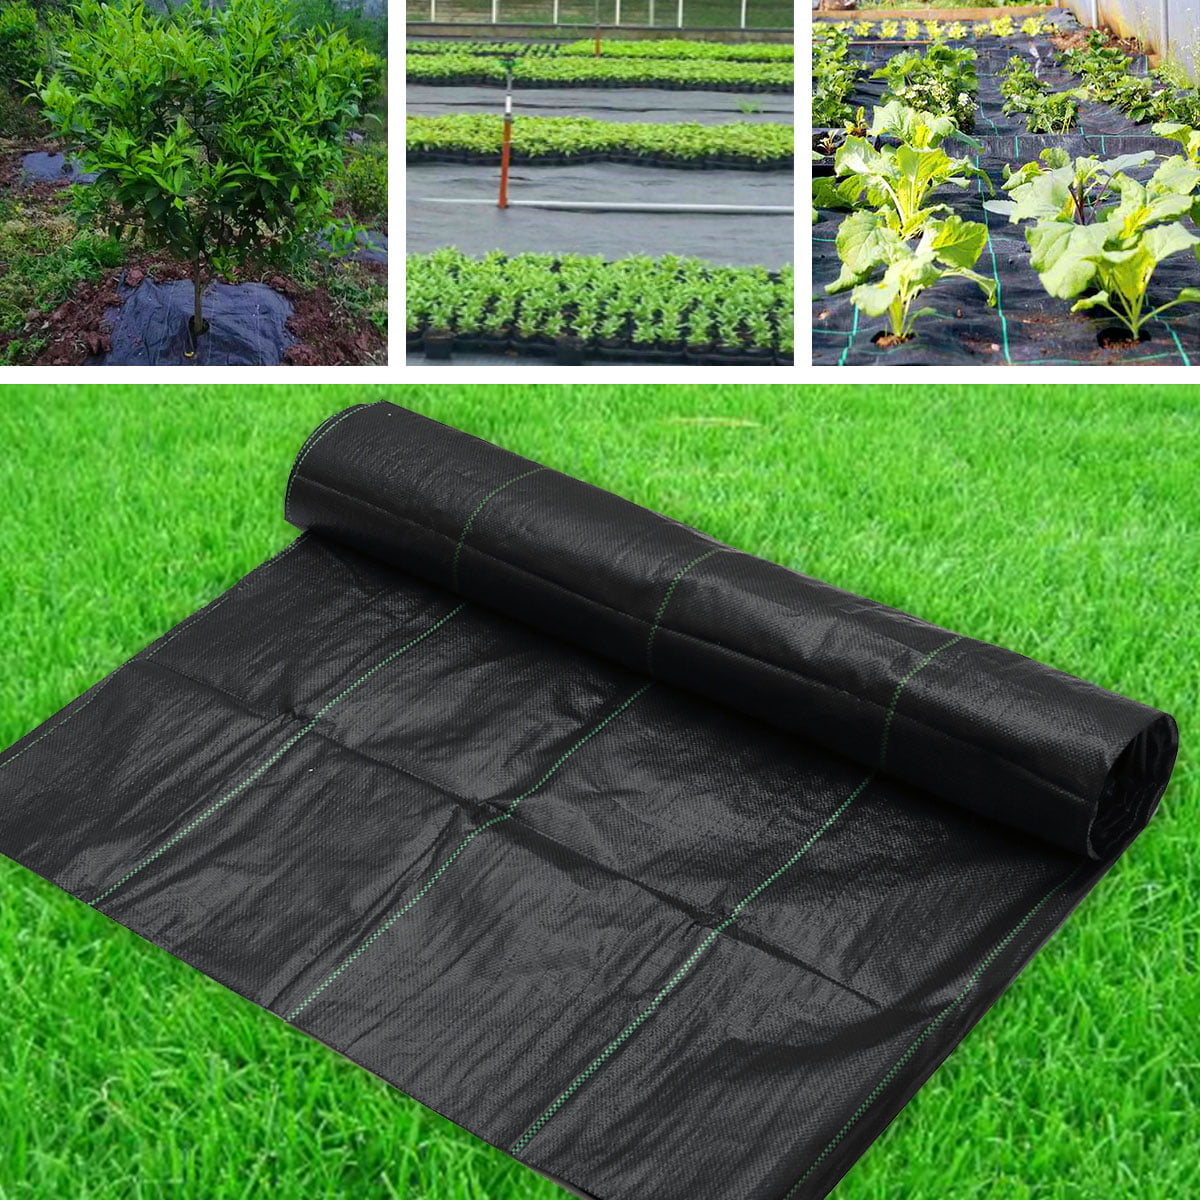 Landscape Barrier & Ground Cover Planting Fabric x 20 ft Extreme Weed Block 15 ft